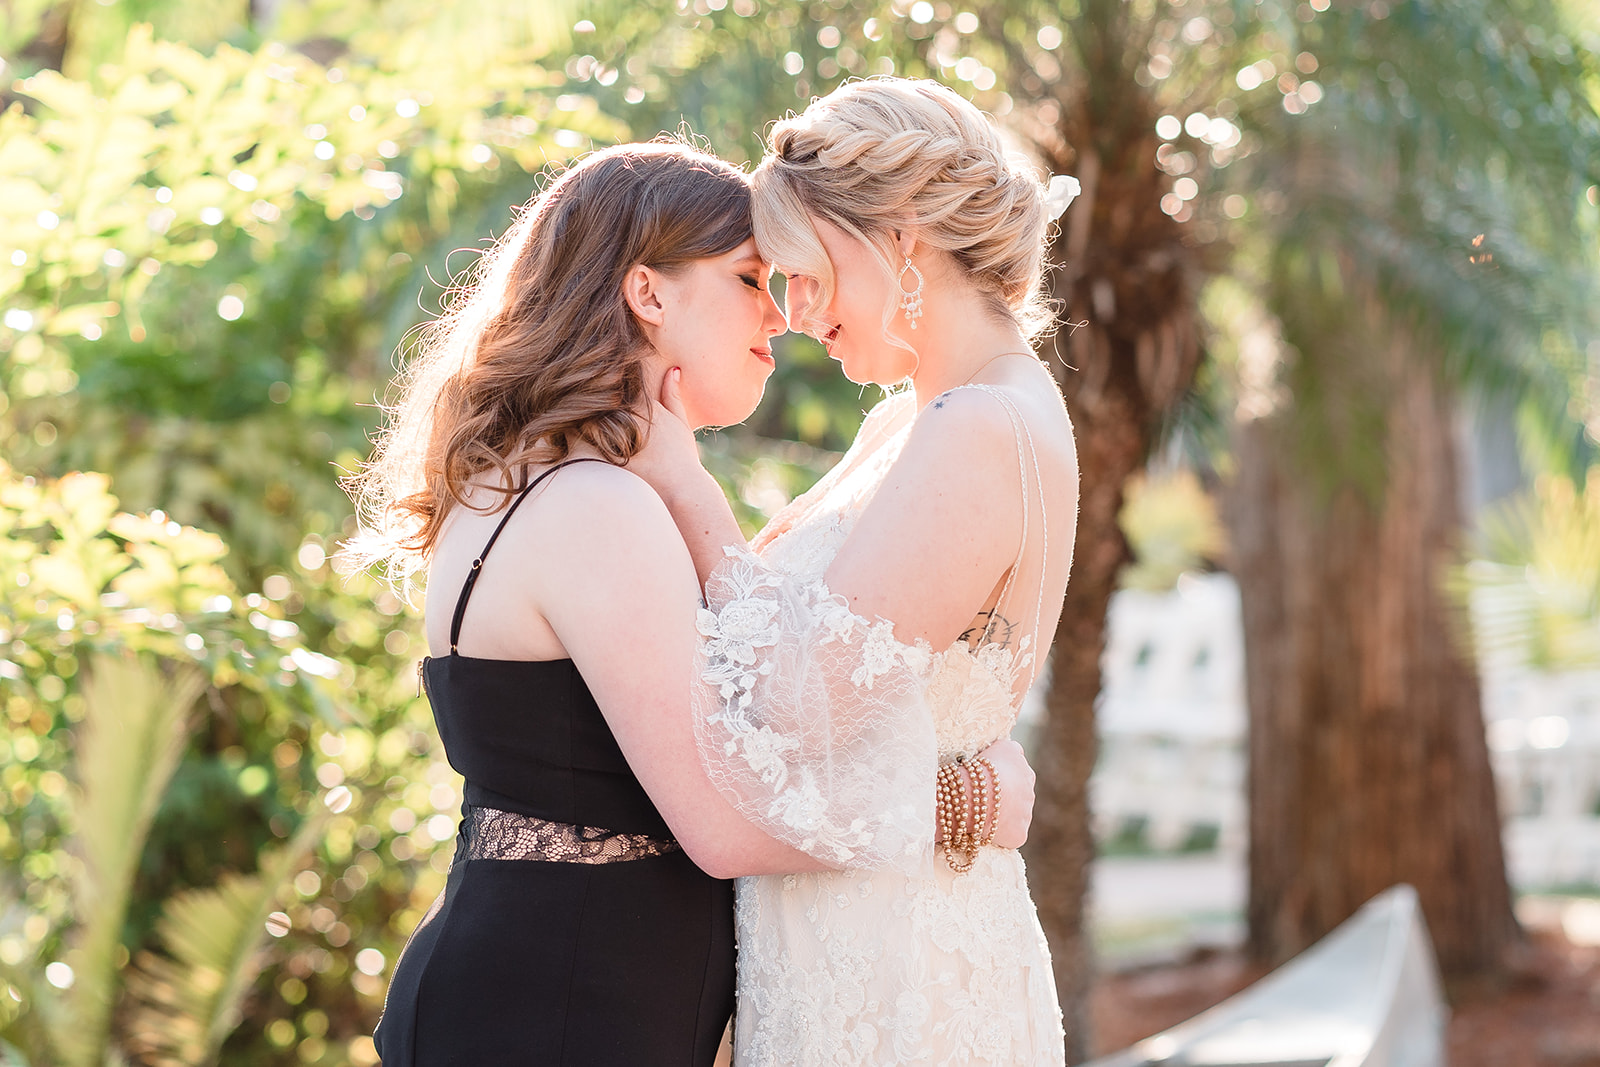 Two brides embrace each other tenderly against a backdrop of nature, their love illuminated by the serene beauty of the surroundings.